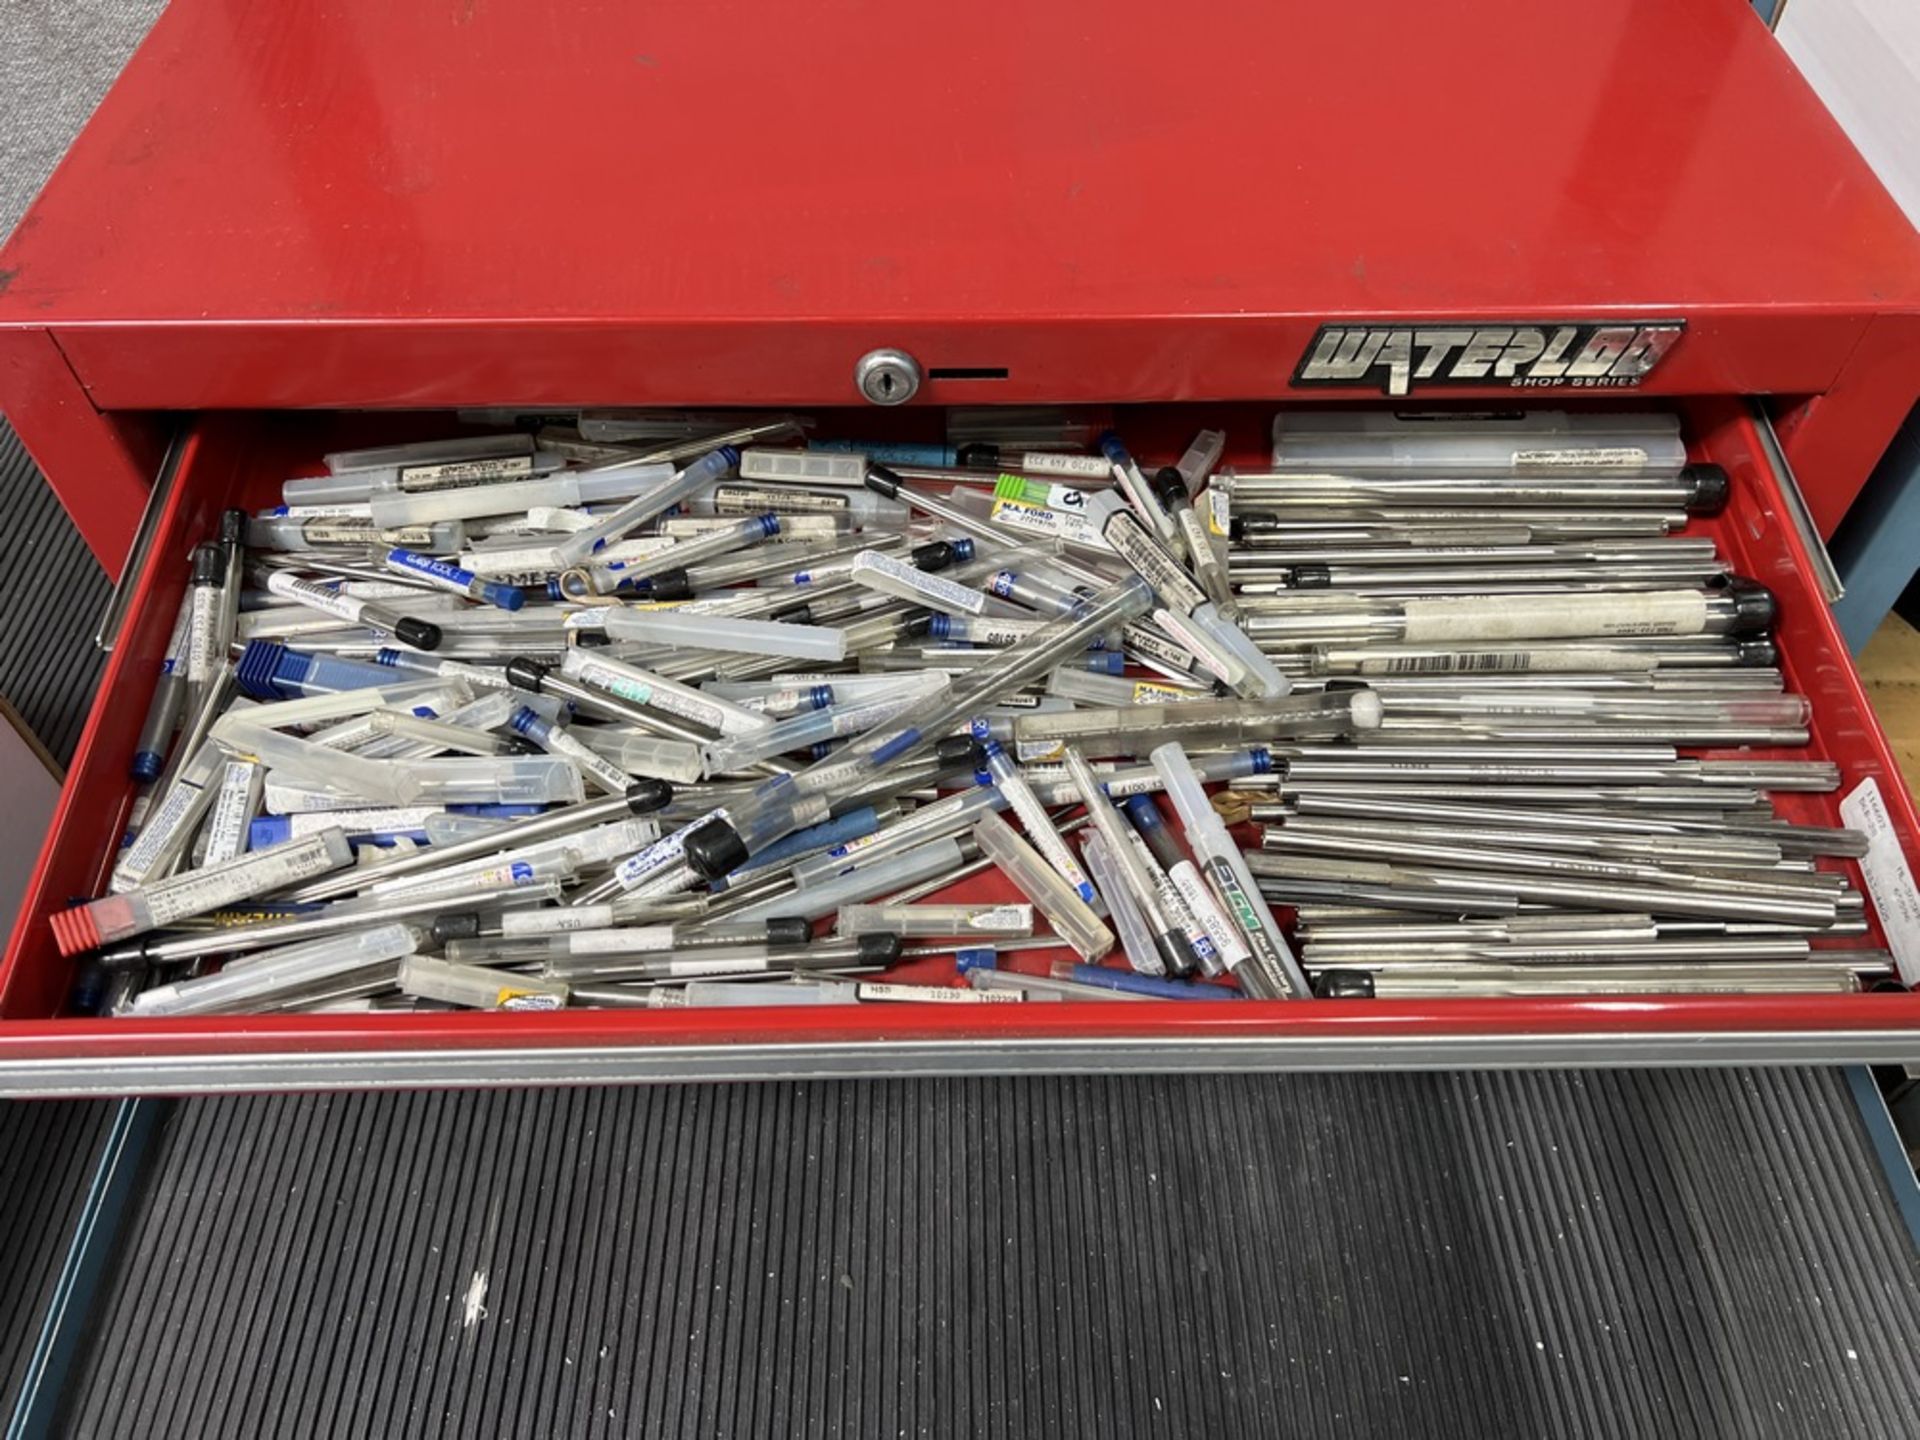 Water 100 Shop Series Tool Box Full of Reamers Big Drills & Key Cutters & Others - Image 2 of 9